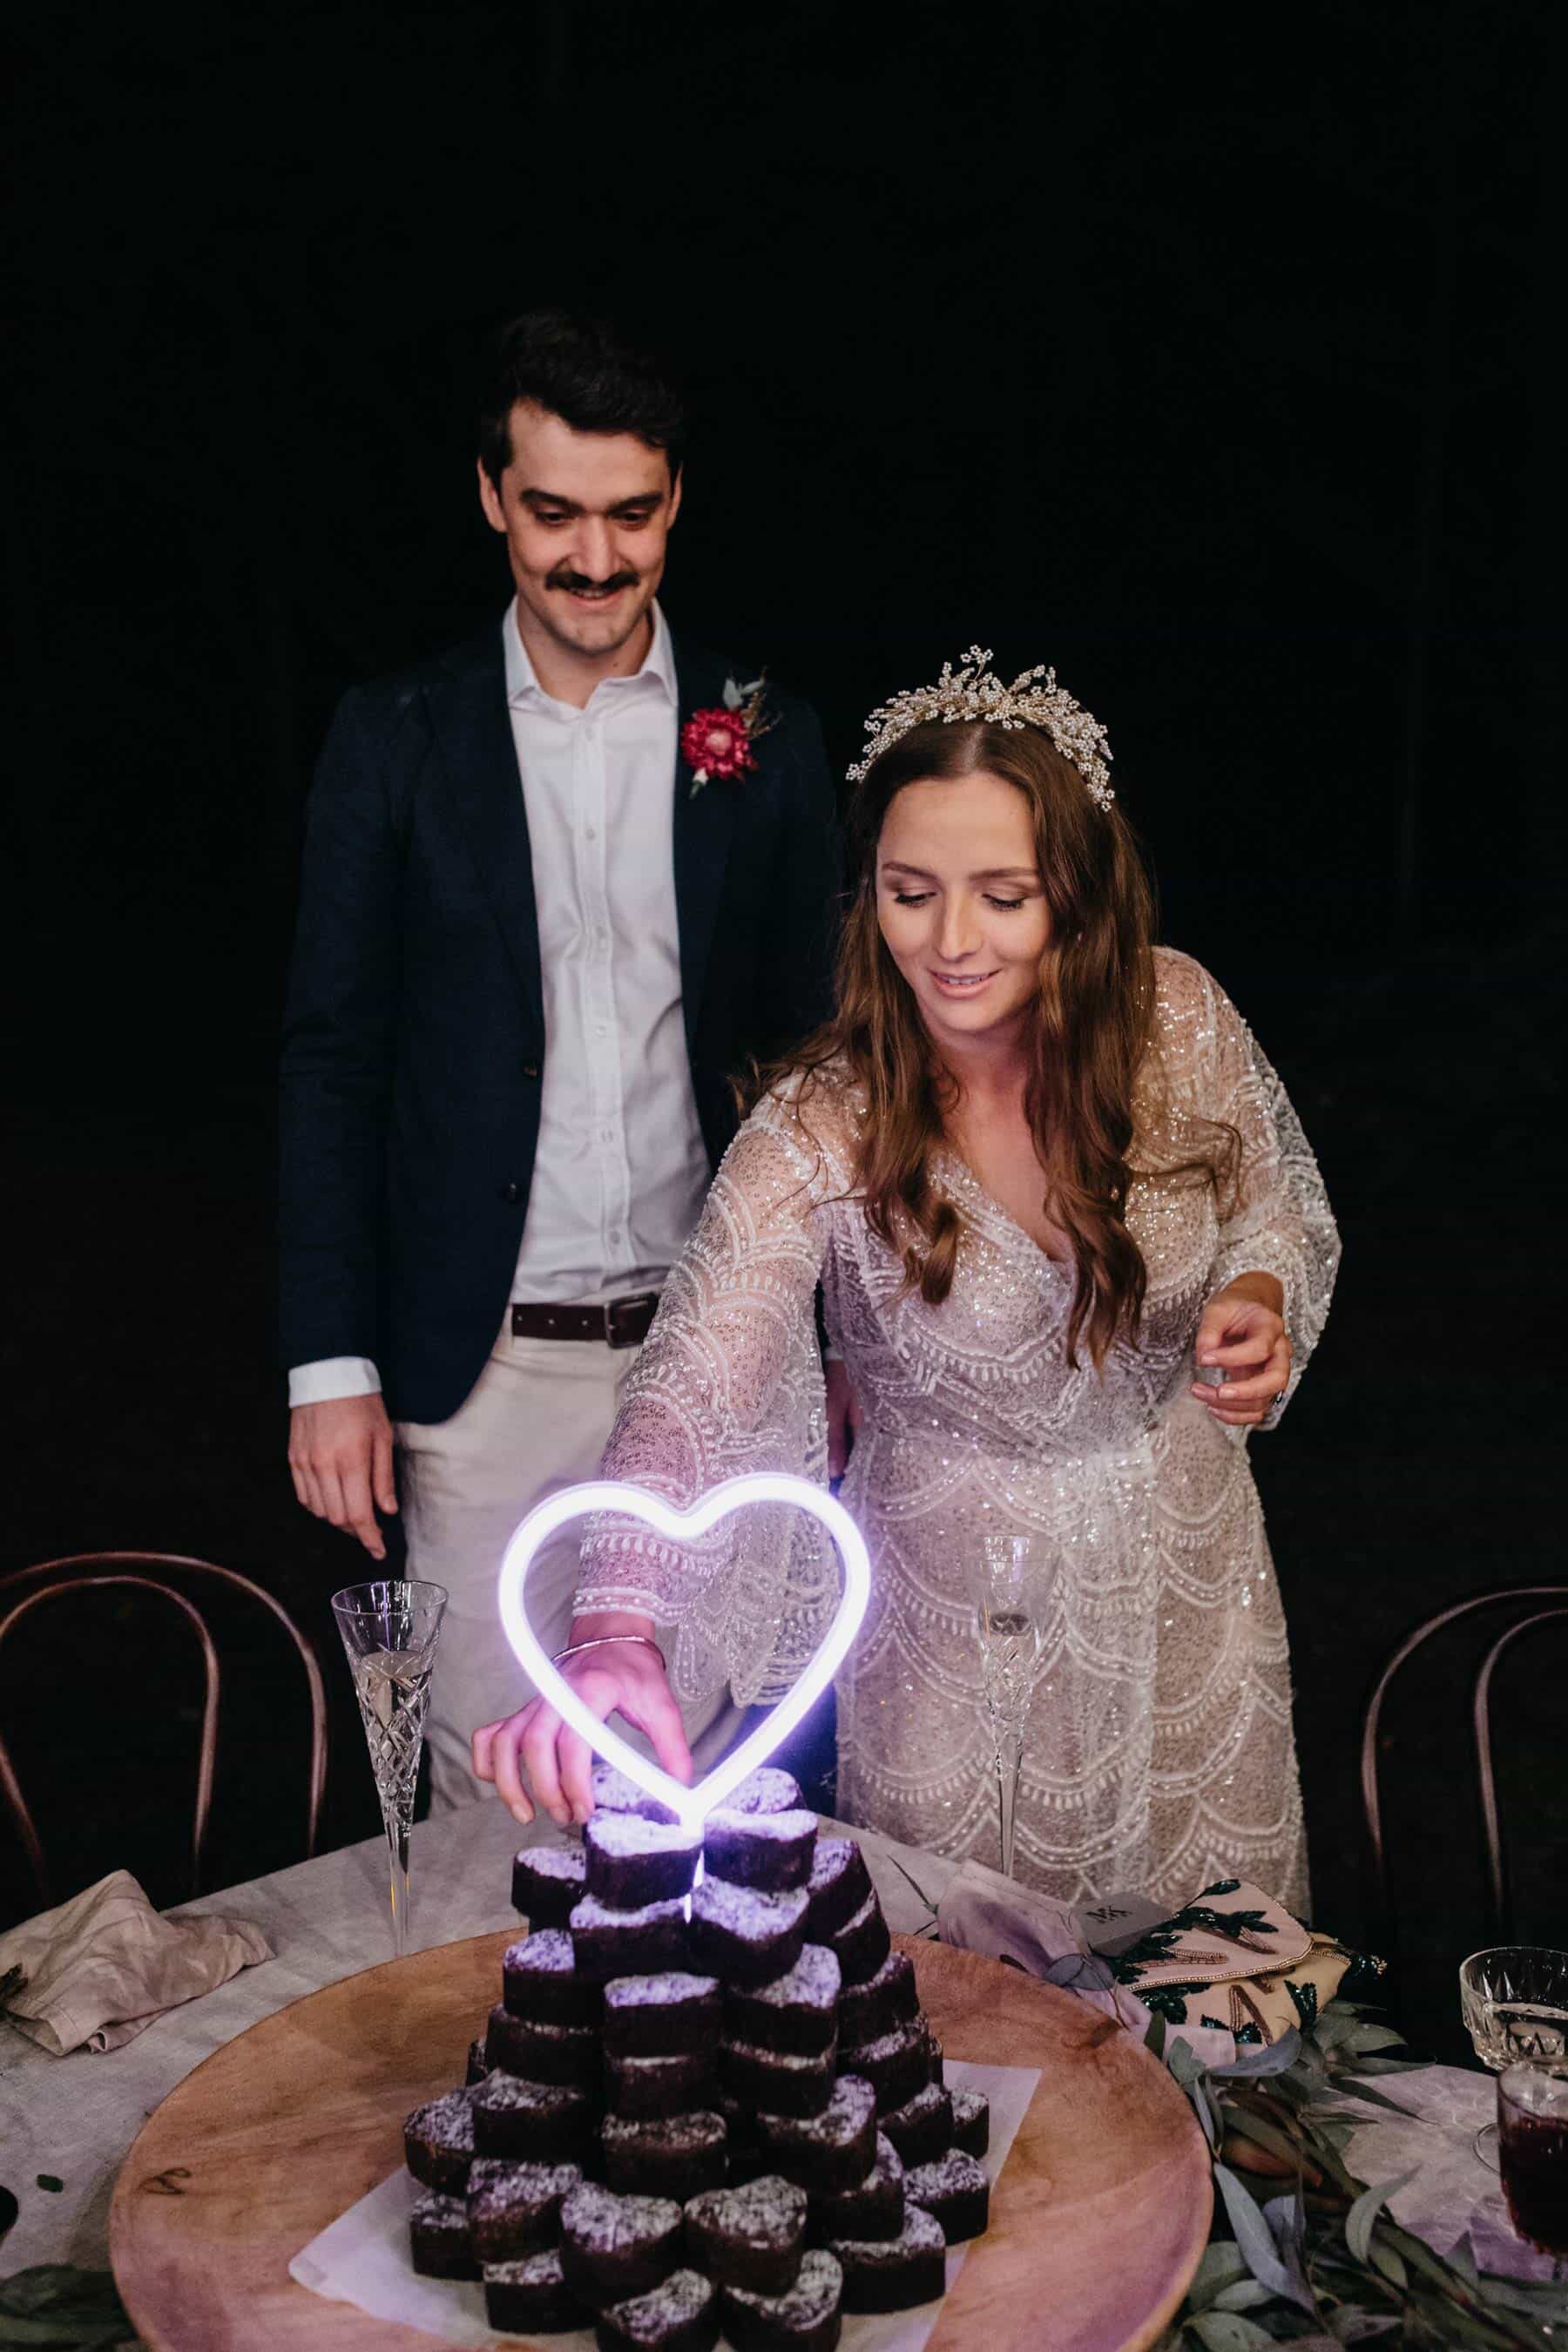 brownie wedding cake with neon heart topper